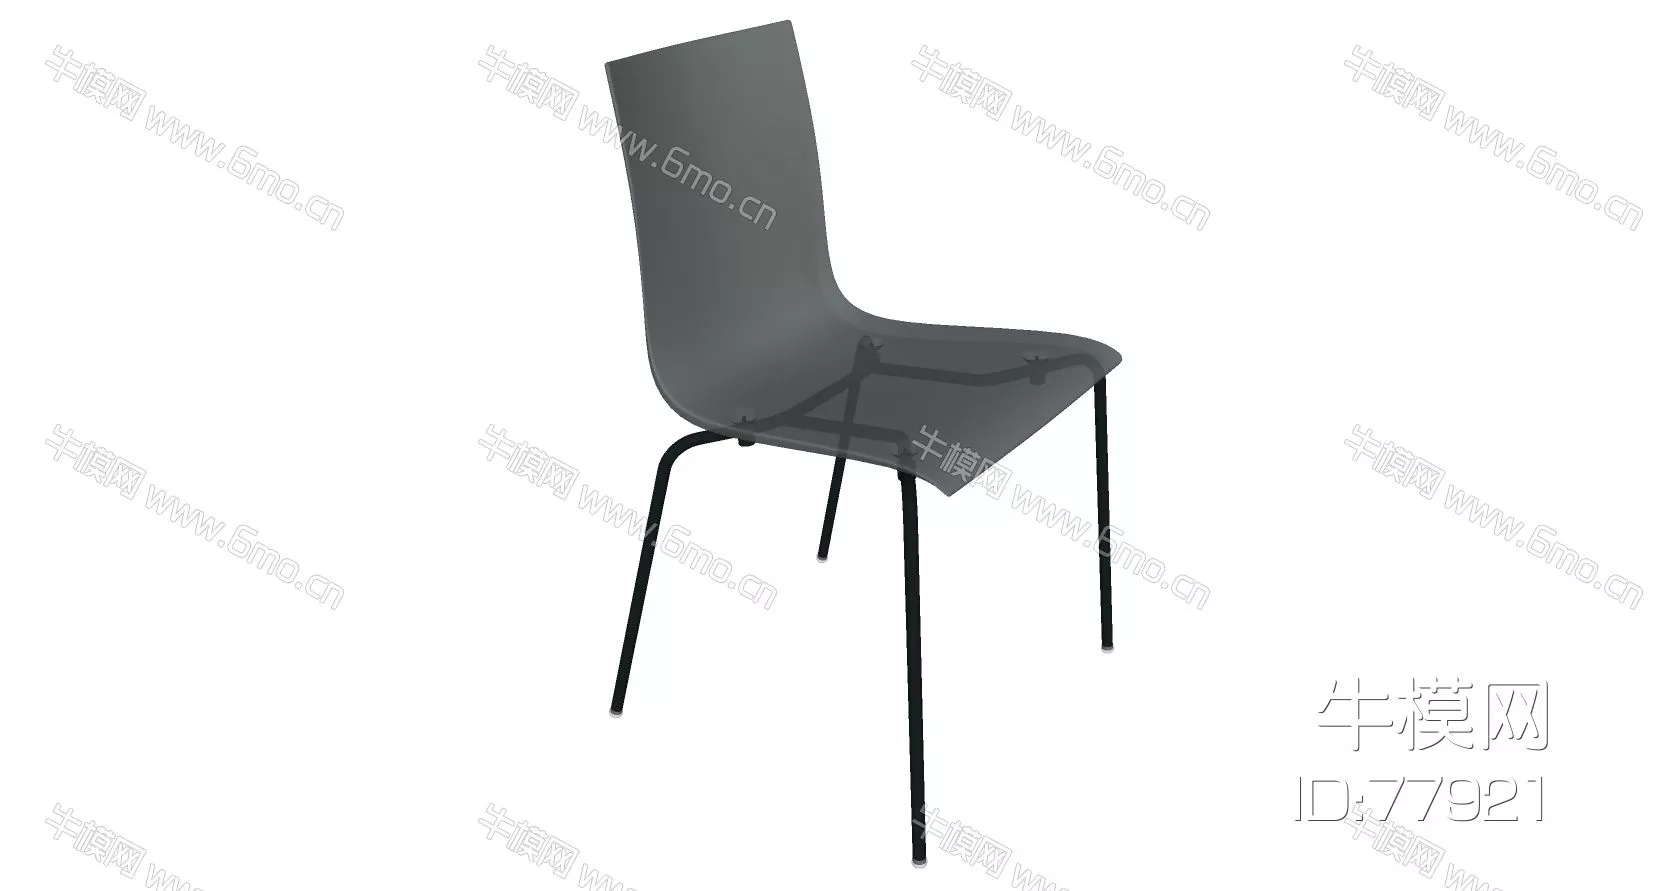 MINIMALIST LOUNGLE CHAIR - SKETCHUP 3D MODEL - VRAY - 77921